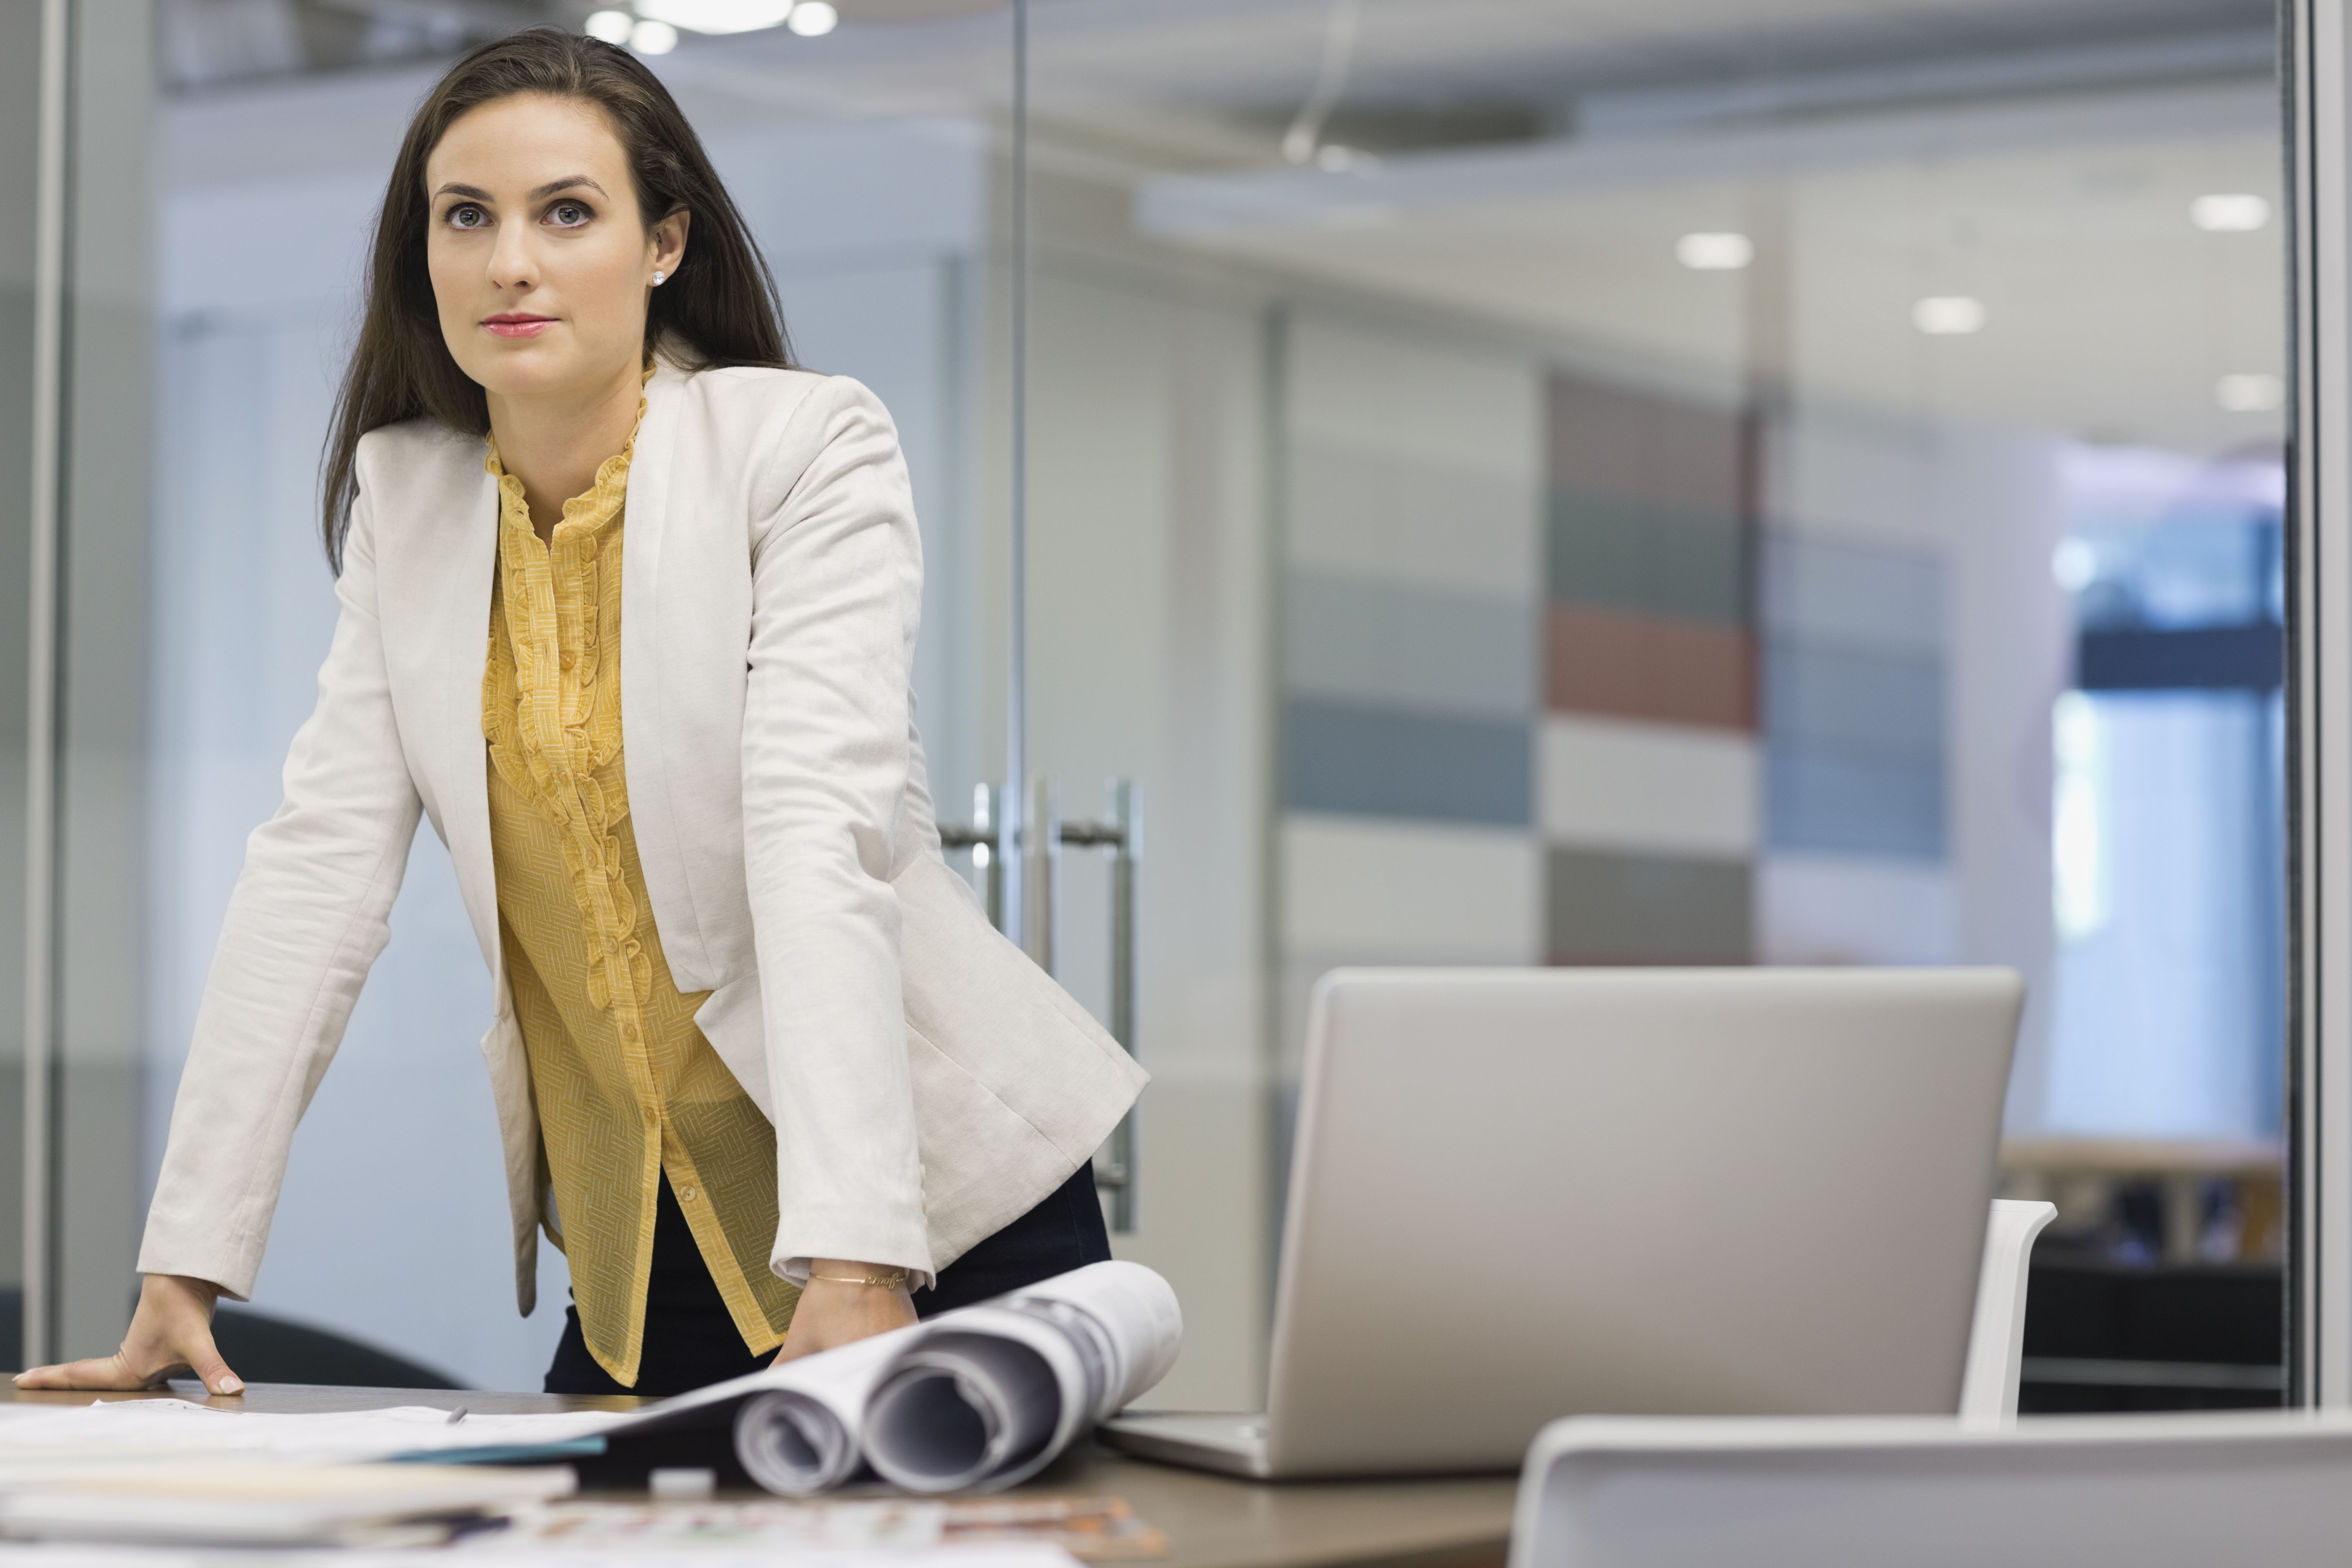 Download Tips for Working with a Difficult Female Boss